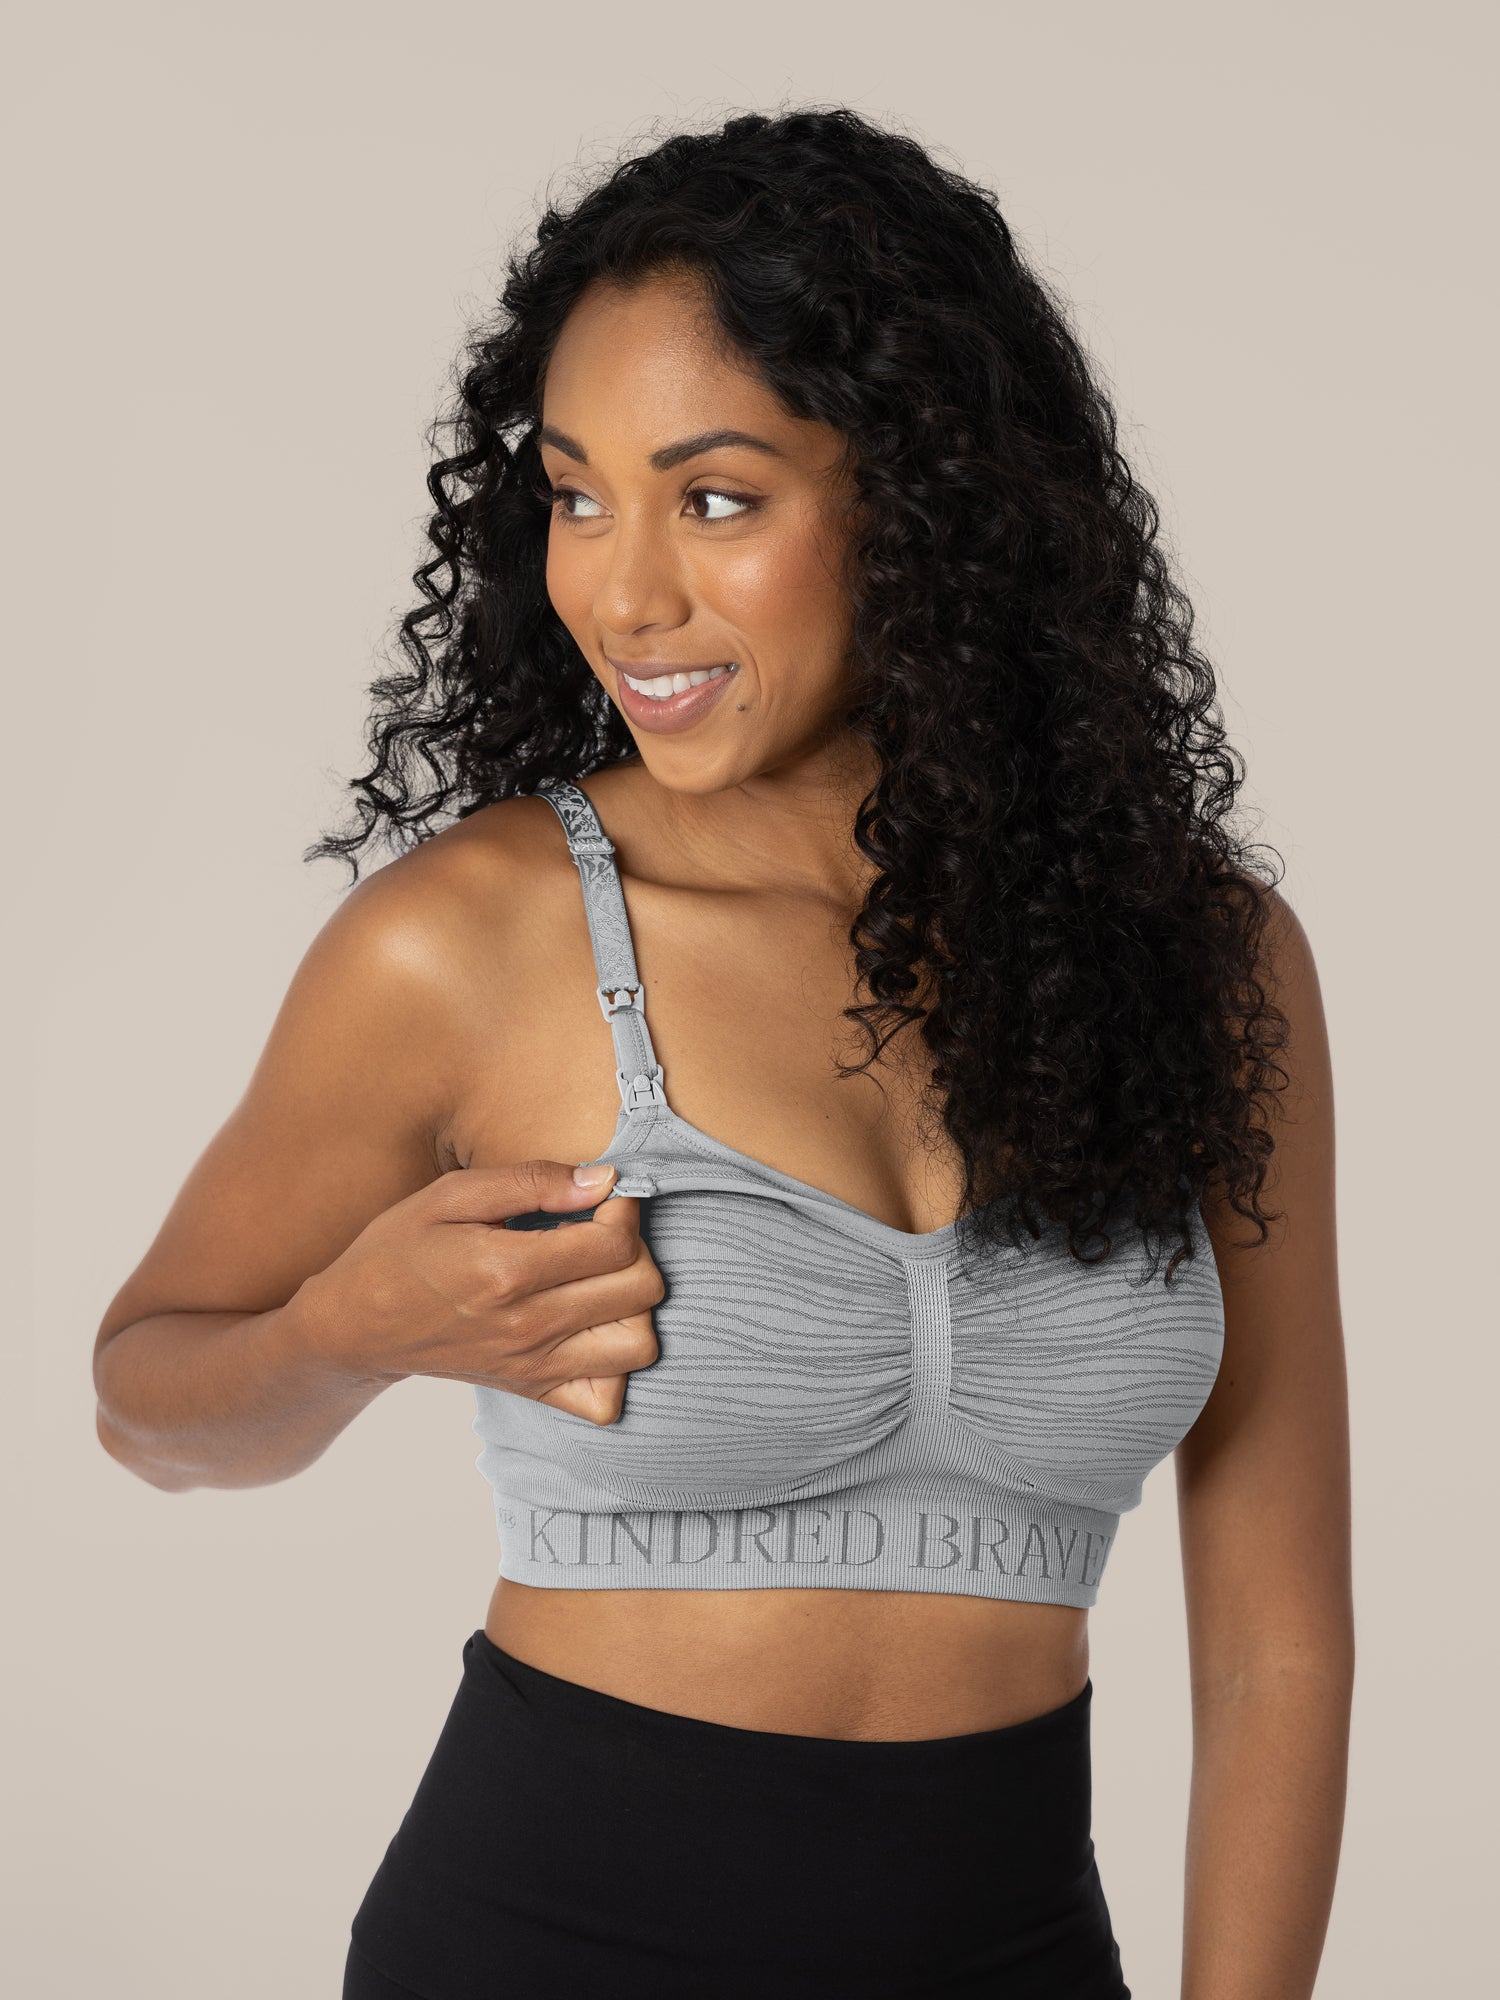 Simple Wishes Hands-Free Breast Pumping Bra - X-Small - Large